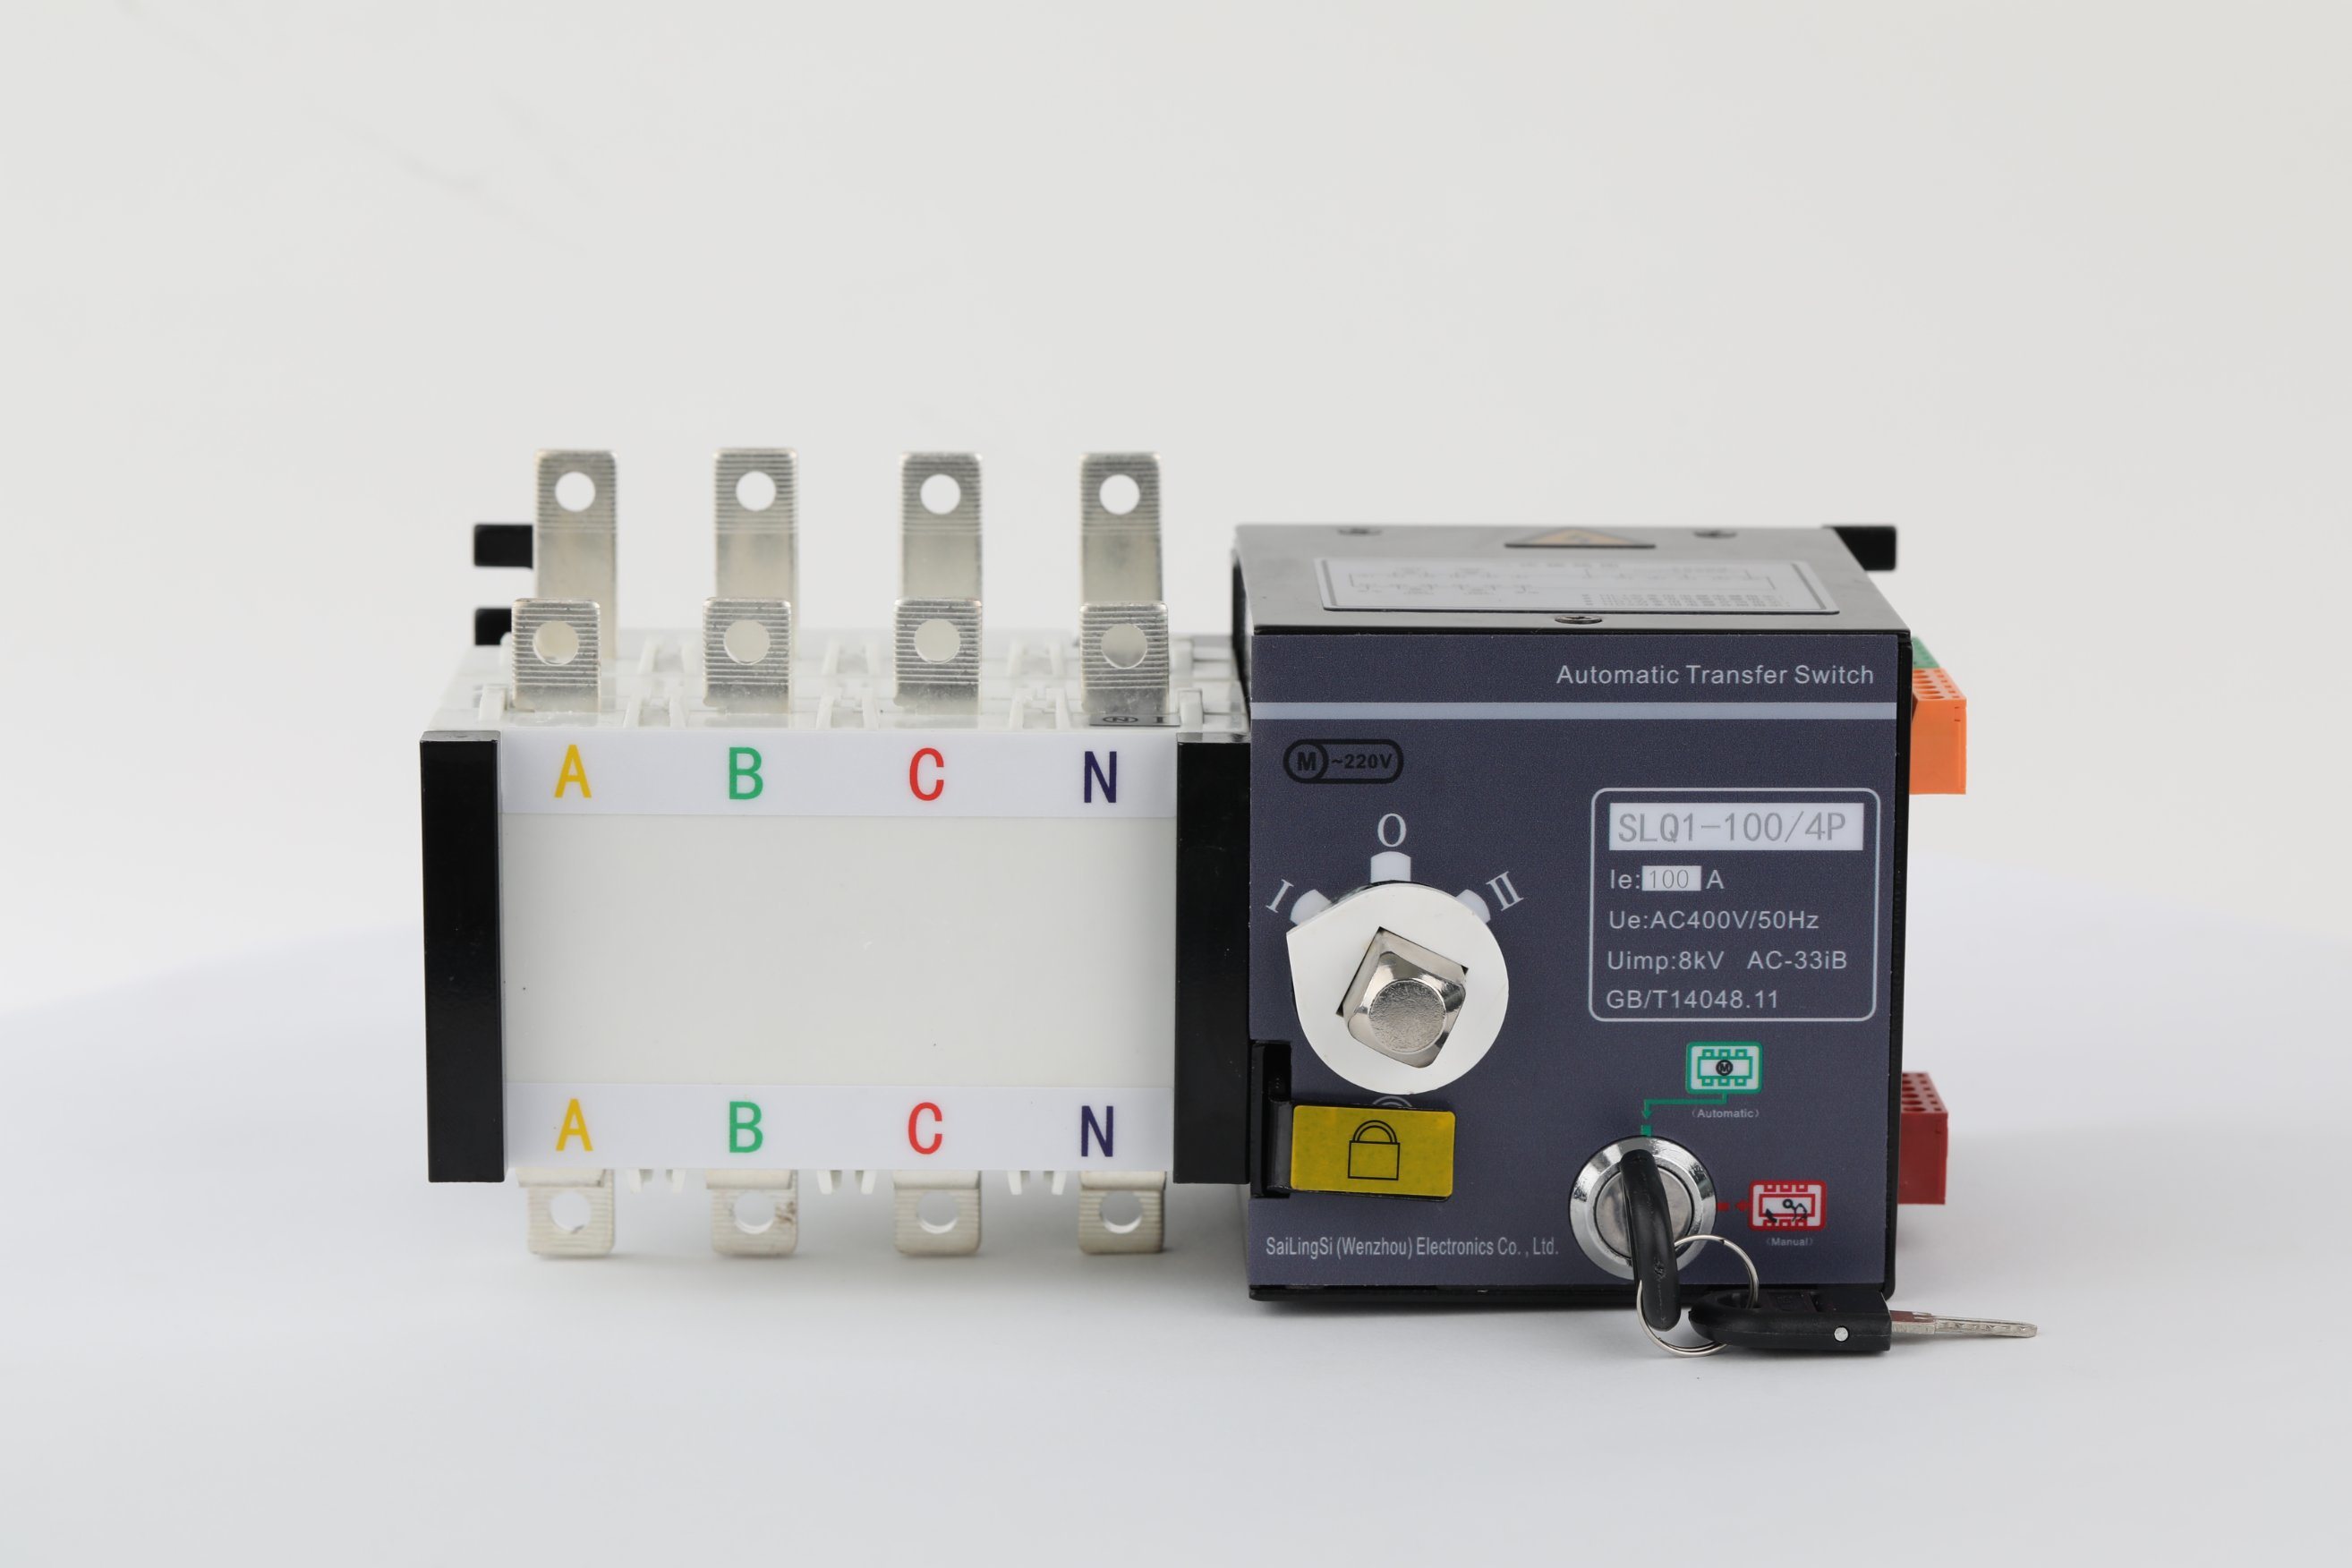 Uvq1-630A 3p ATS 400V 50Hz ATS Self Return Electric Automatic Transfer Switch with Fire Control